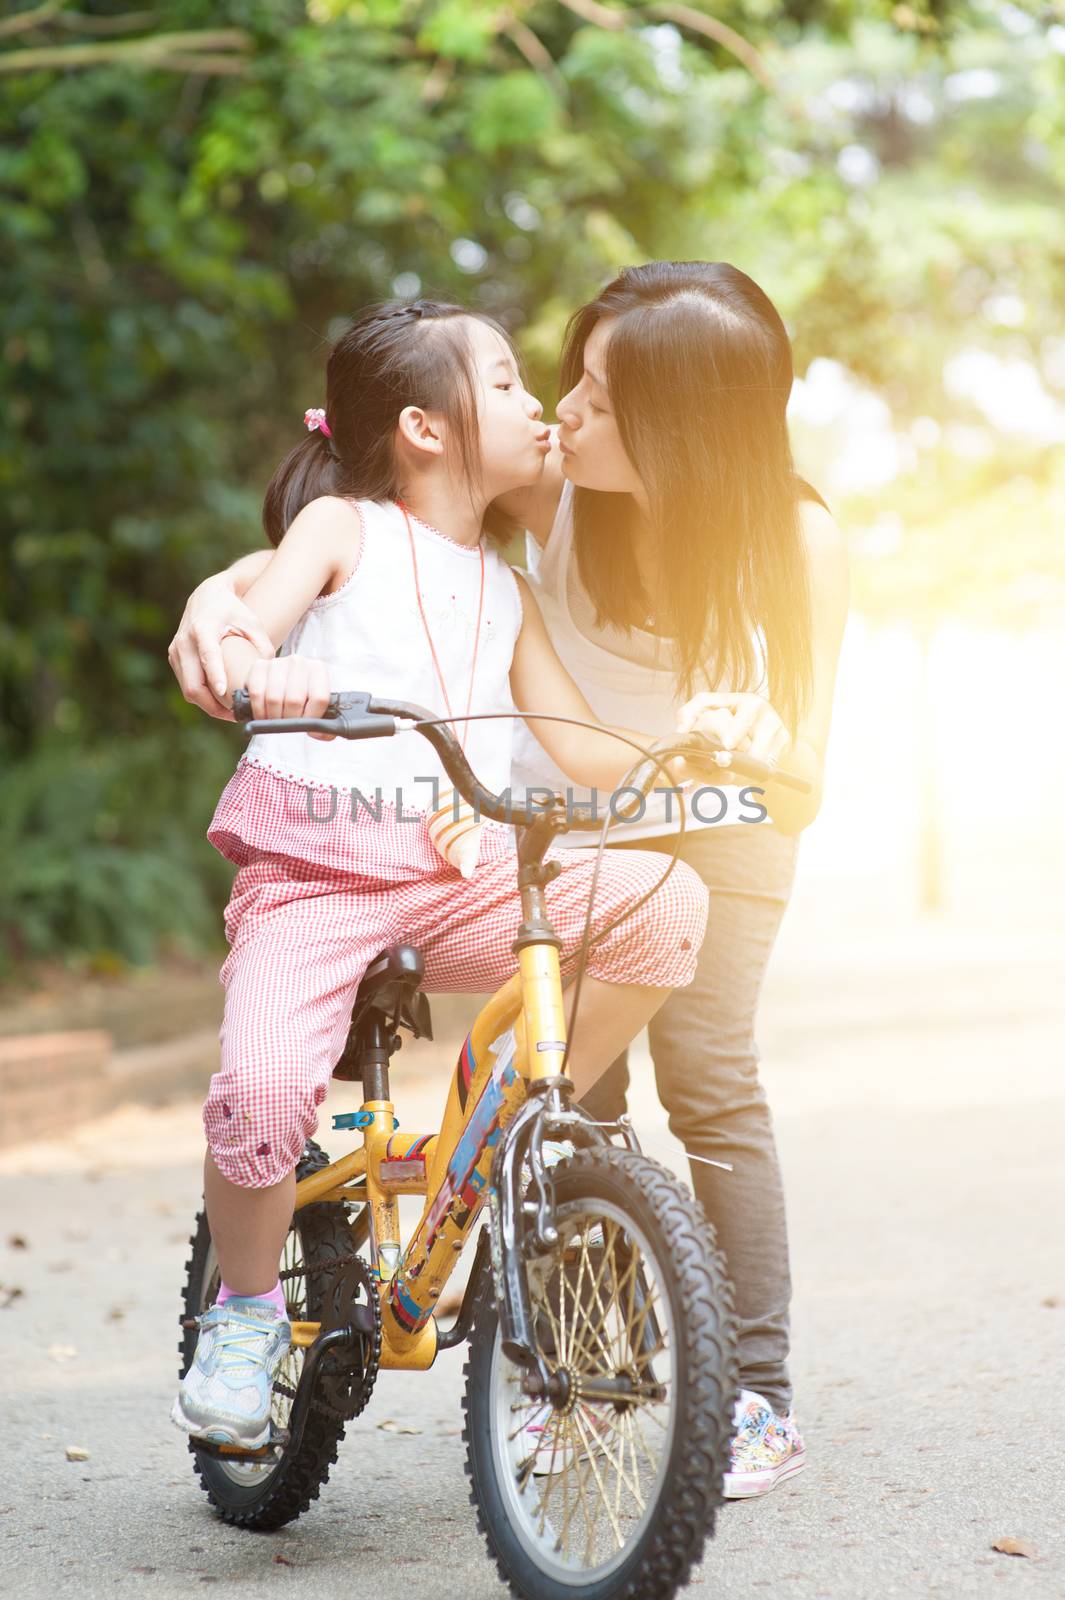 Little girl learning ride on bicycle with help of mother in the park, kissing her mom, Asian family outdoor fun activity.